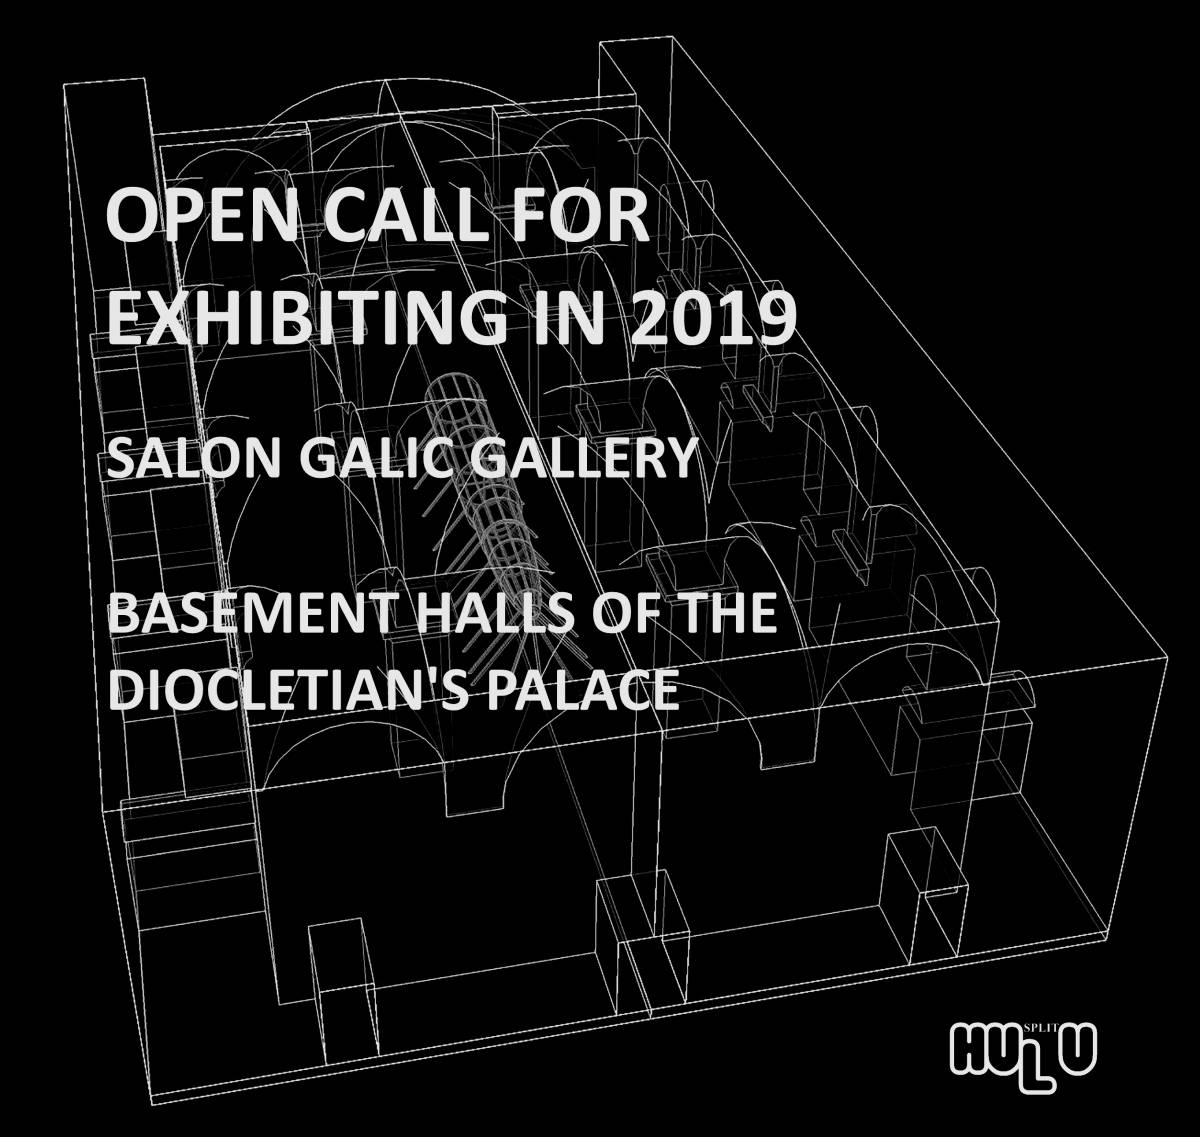 OPEN CALL FOR EXHIBITING in 2019